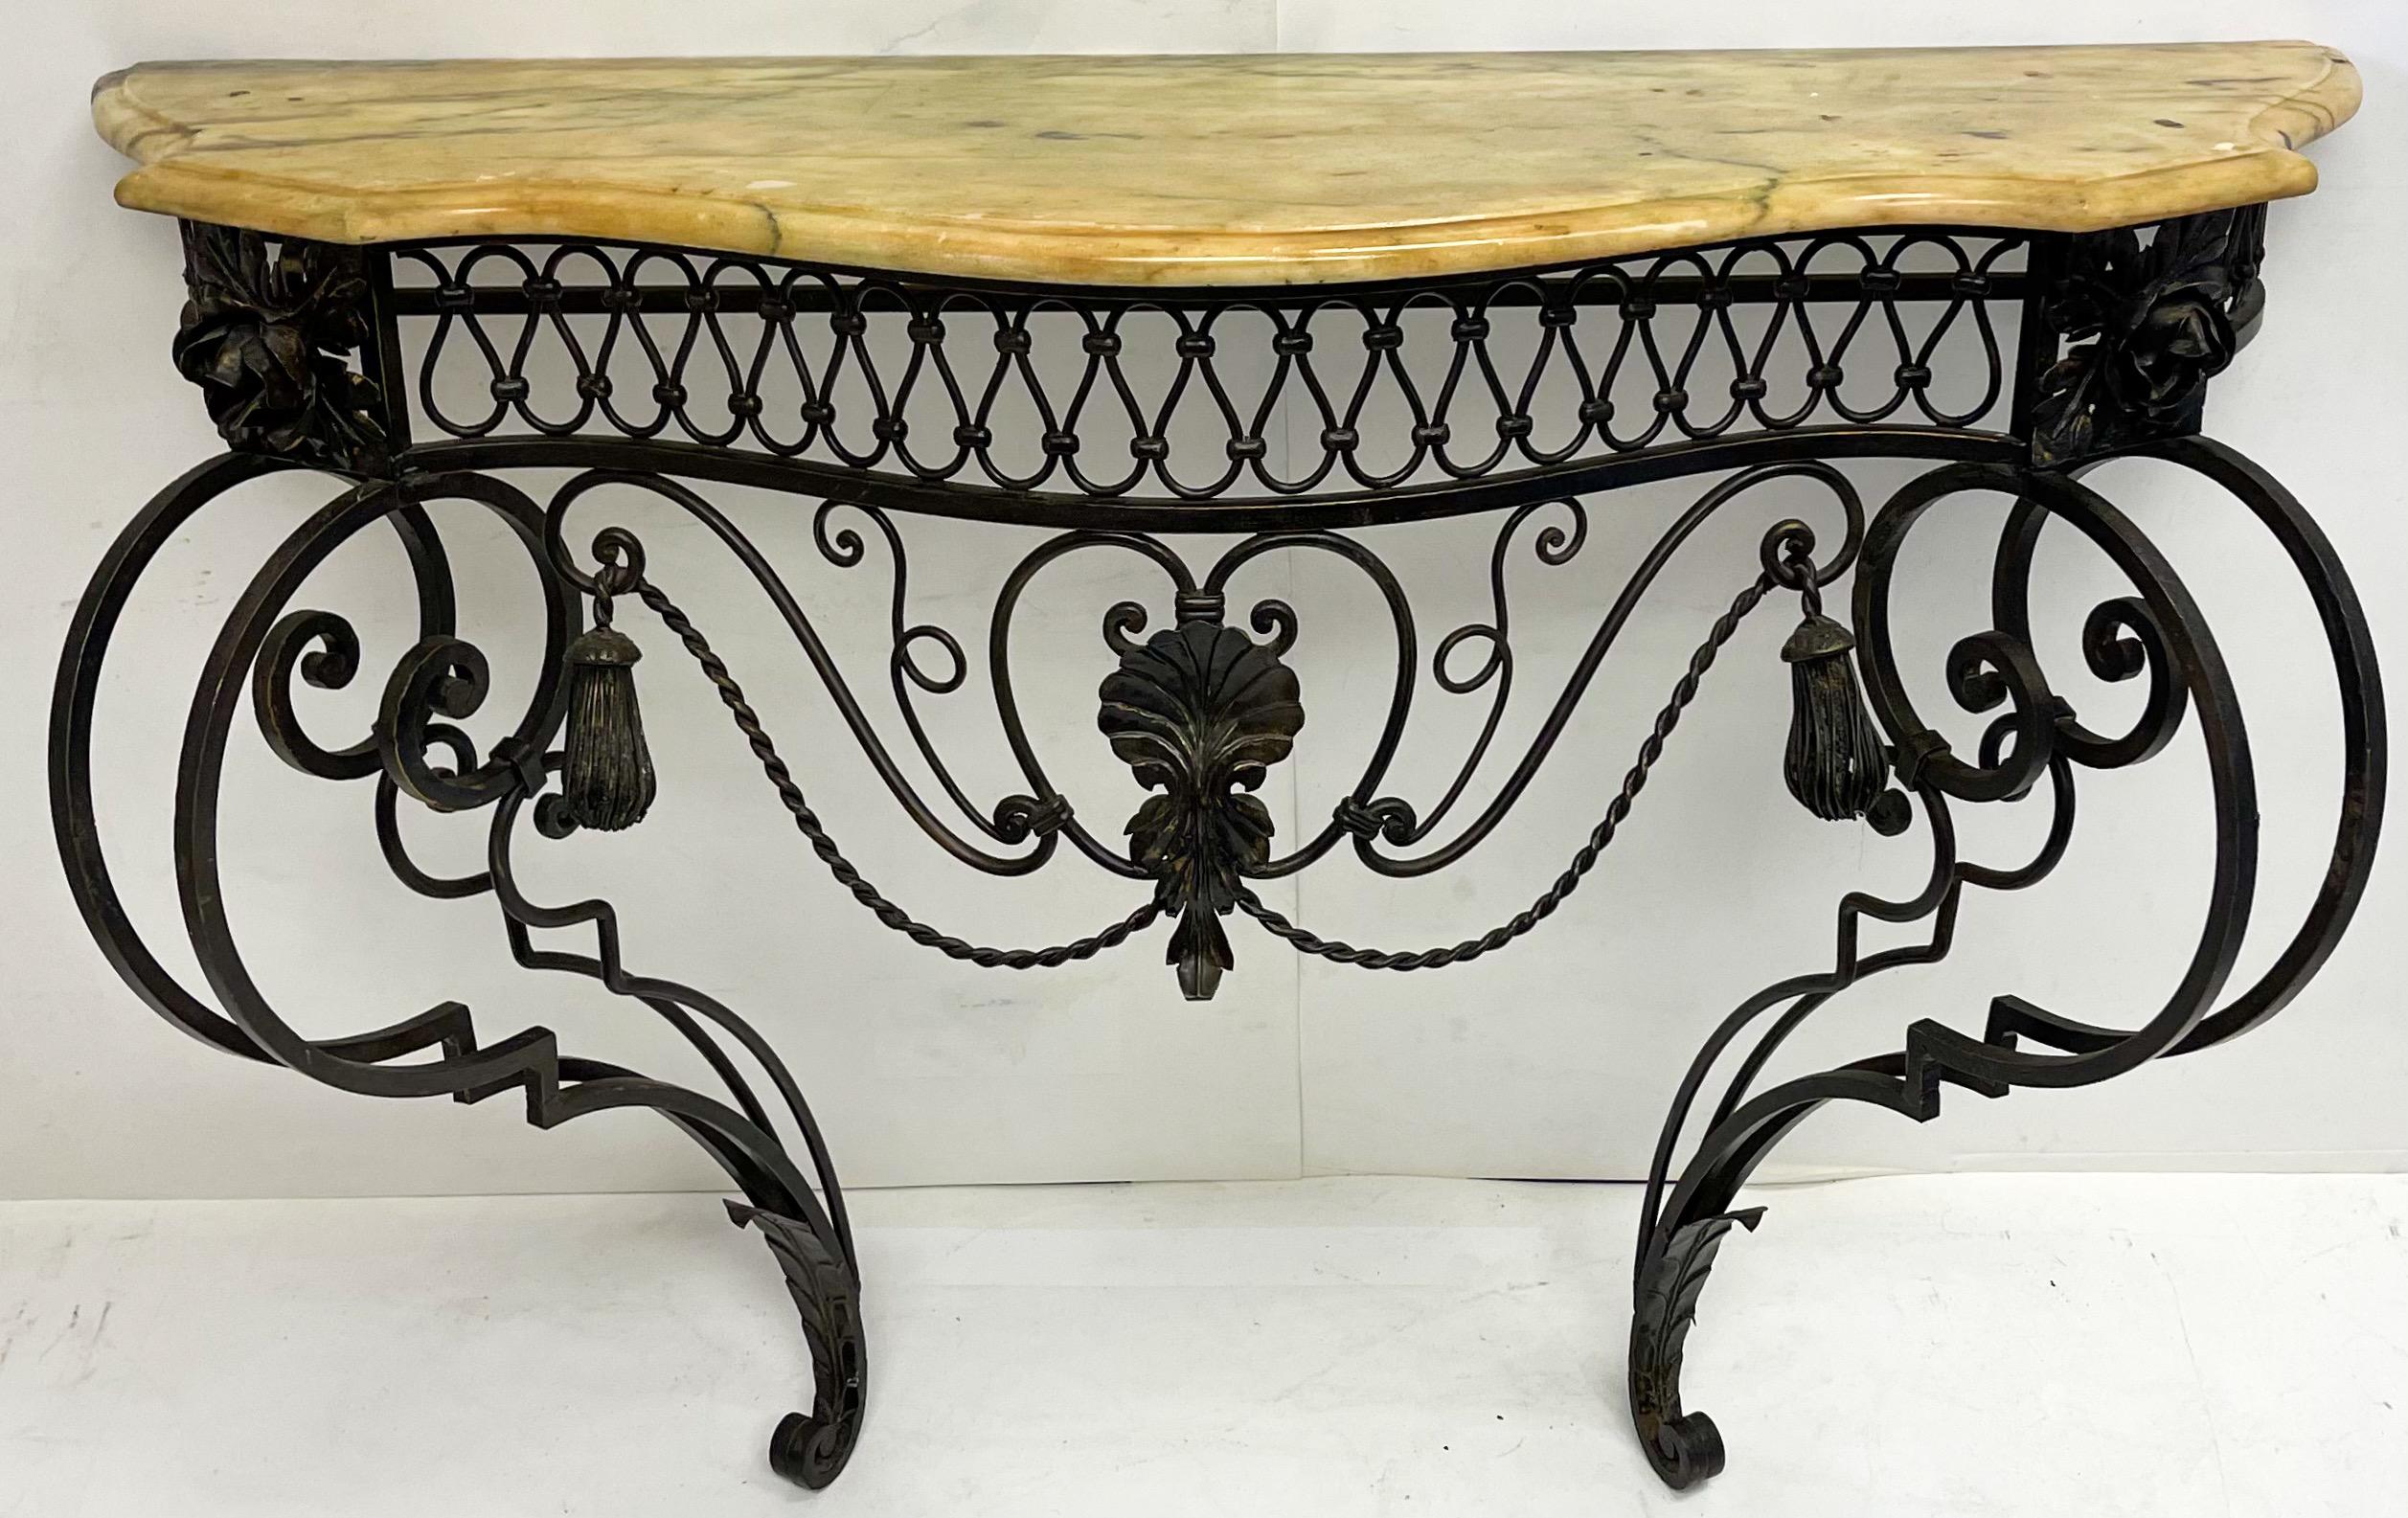 This is a mid-century Italian neo-classical style iron and marble top console table. It is wall mounted. The elaborate scrolled iron is accented with both shell and tassels. It is in very good condition. The 15 inch depth listed below is for the